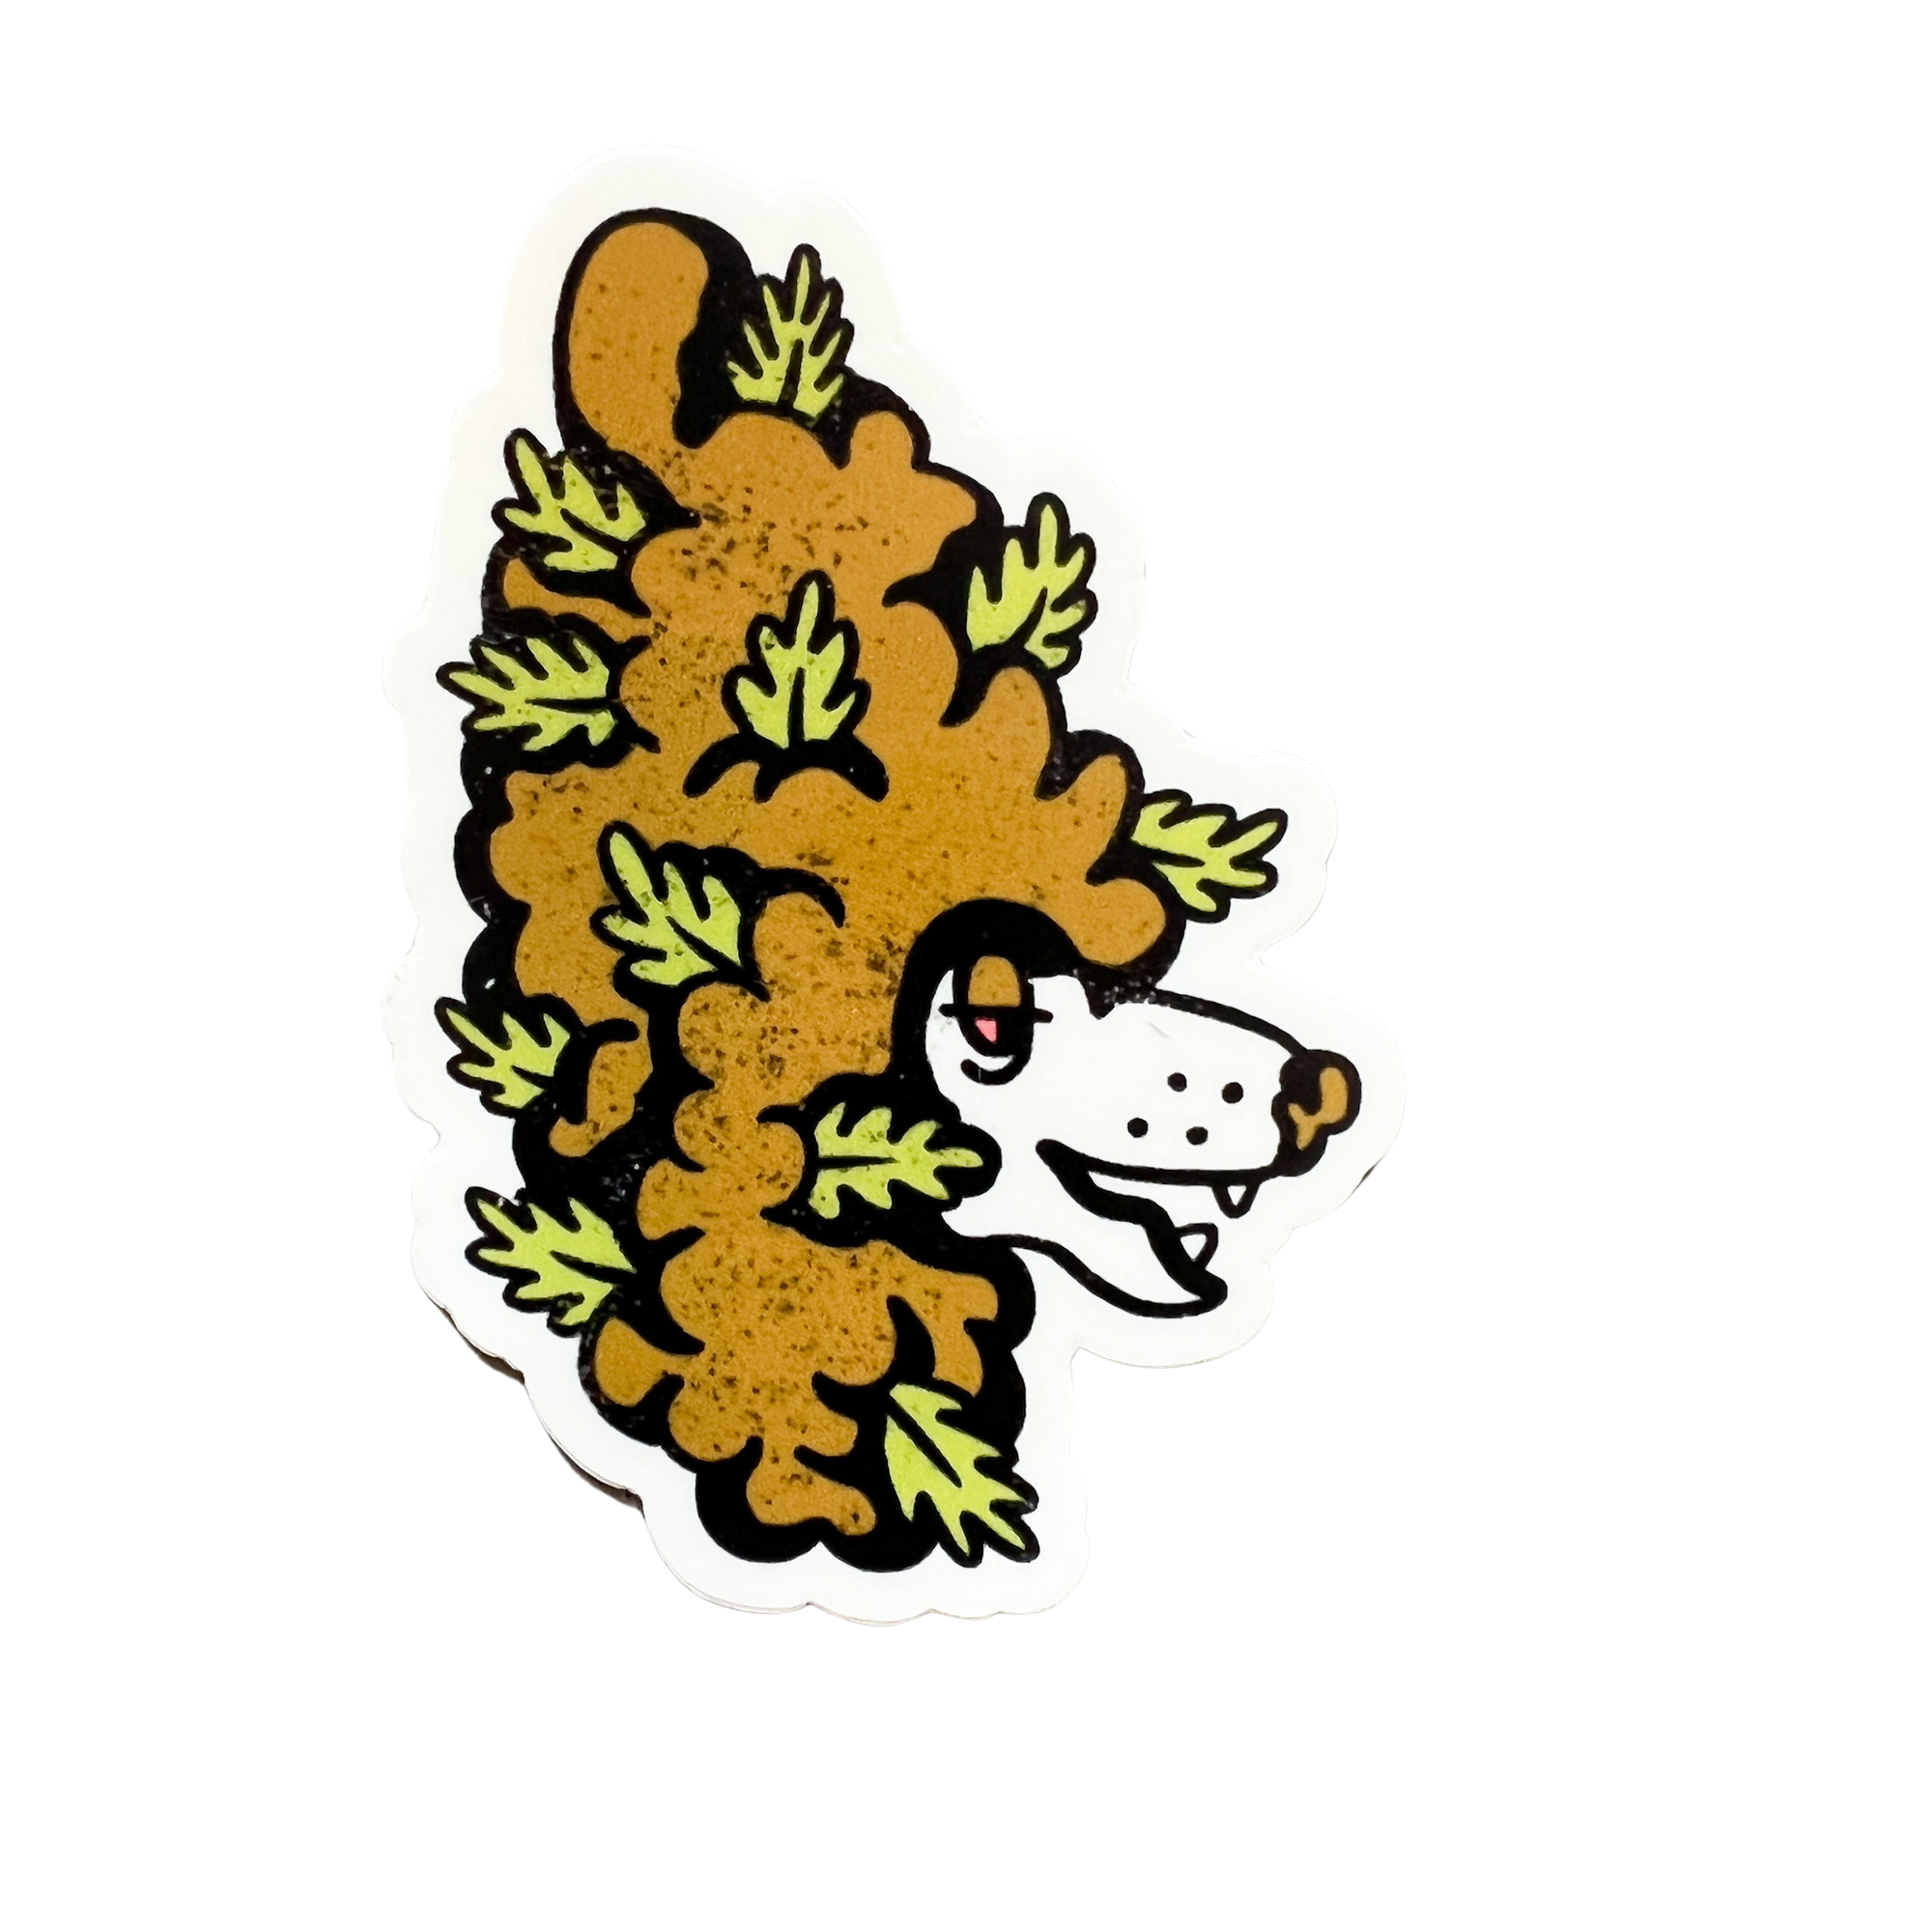 Weed Poodle Sticker No. 2